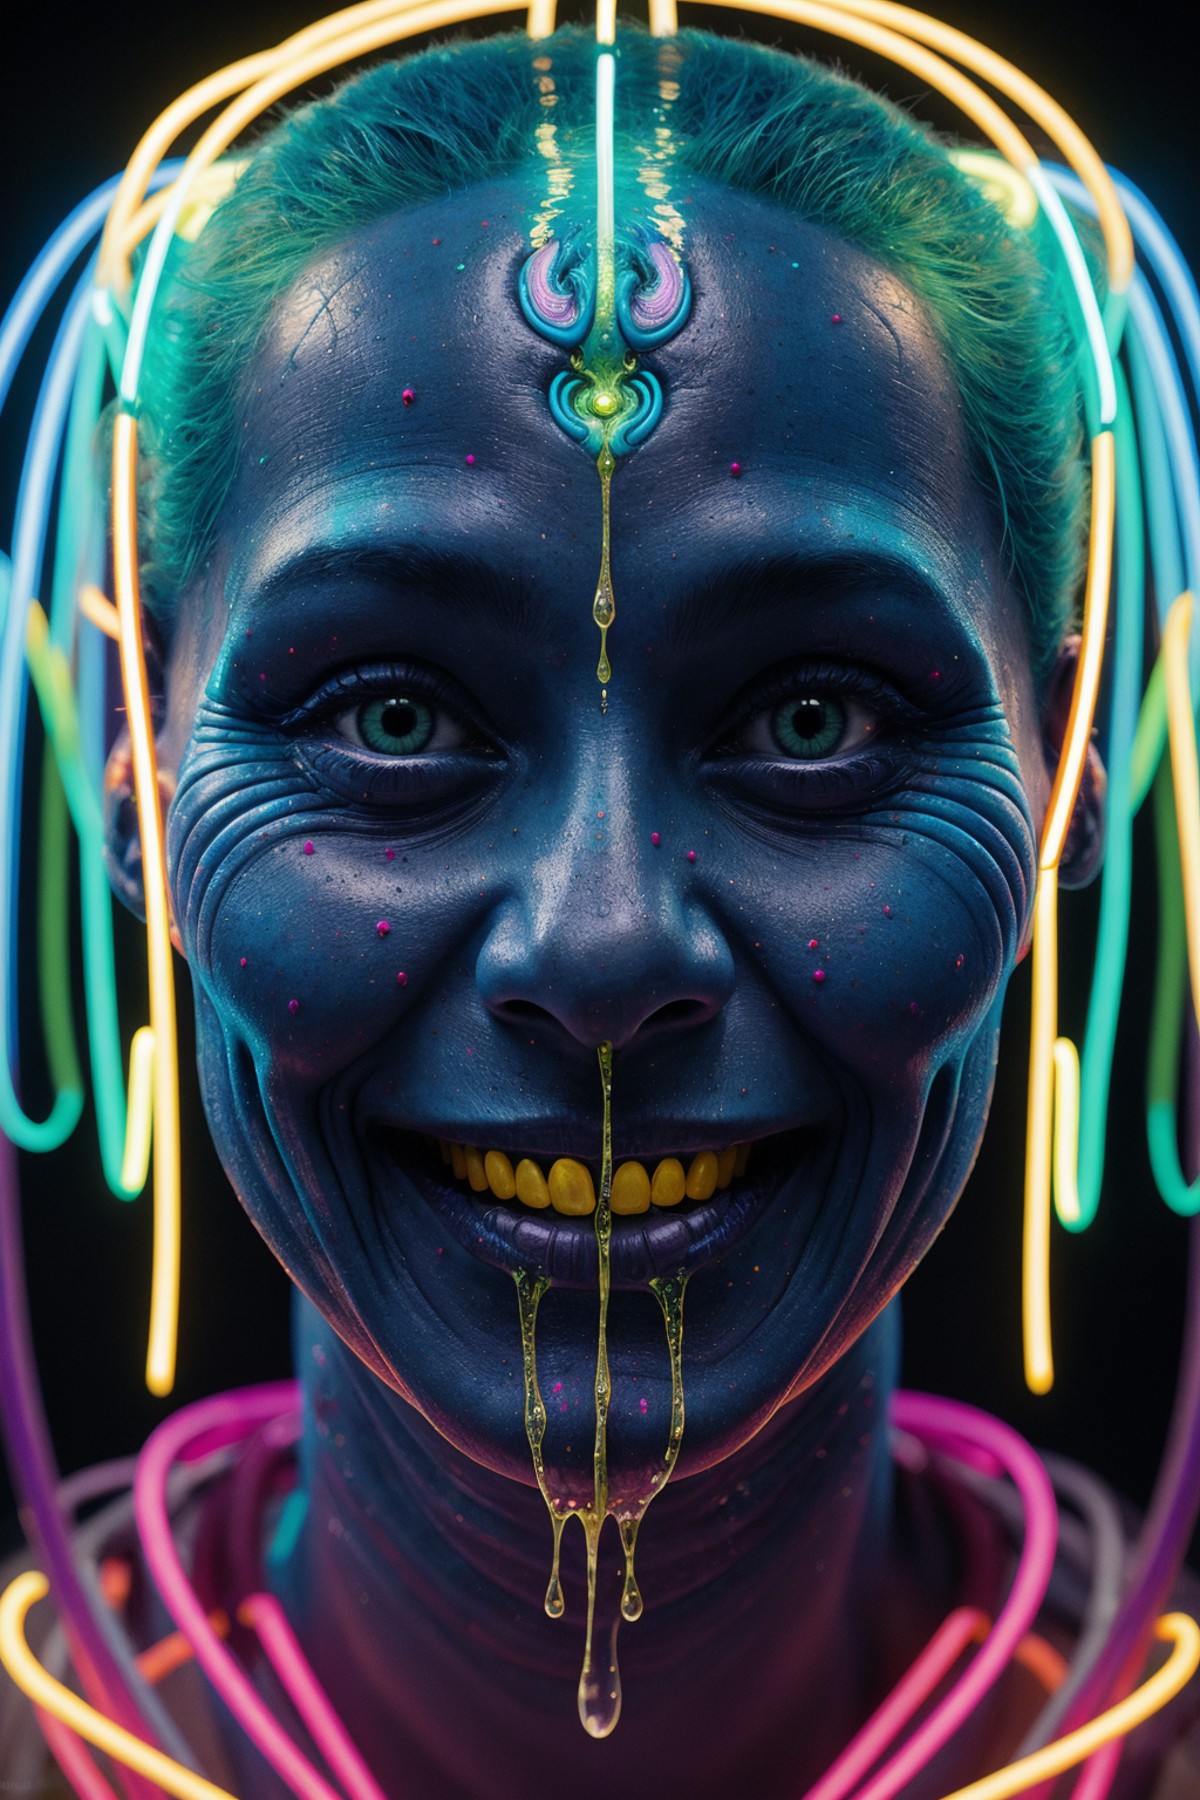 00047-impossibly beautiful portrait of alien shapeshifter entity, insane smile, intricate complexity, surreal horror, inverted neon ra.png